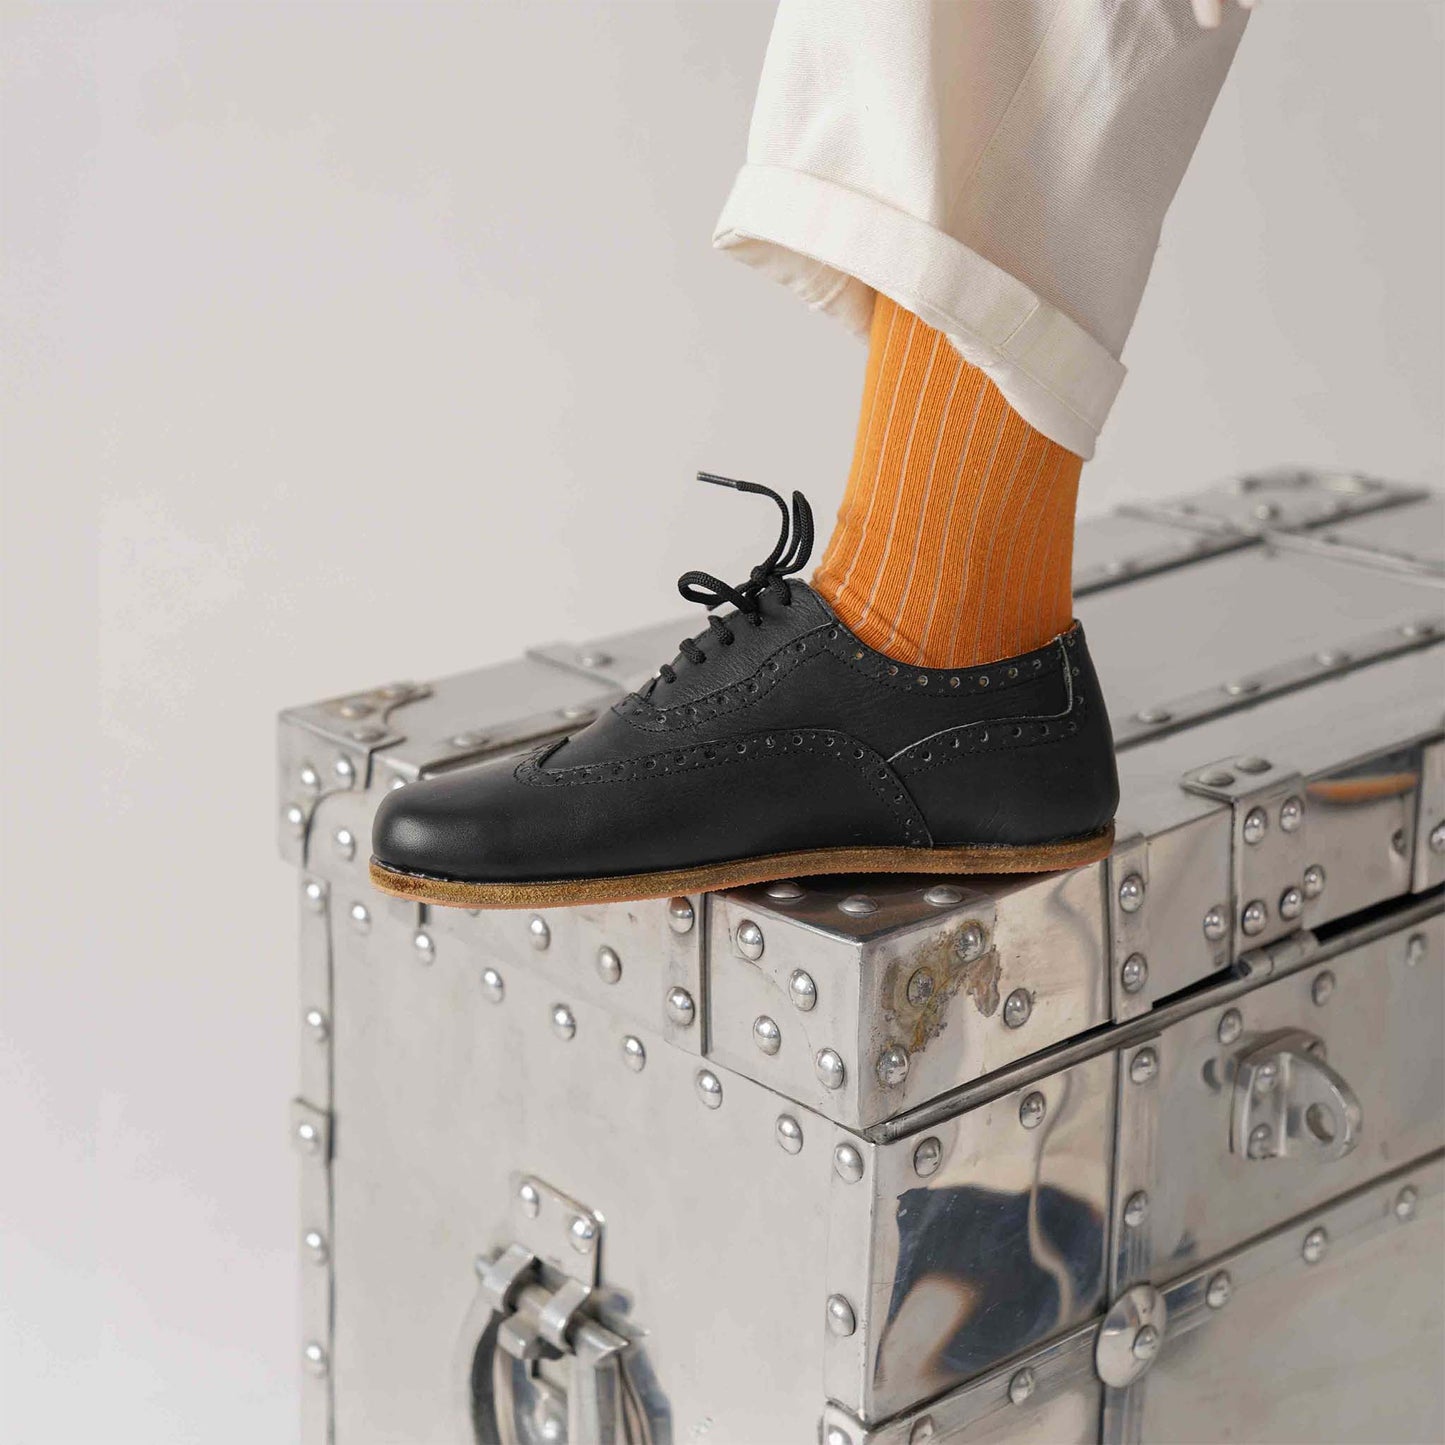 Side view of black Doris Leather Barefoot Women Oxfords being worn, highlighting comfort and style with orange socks.